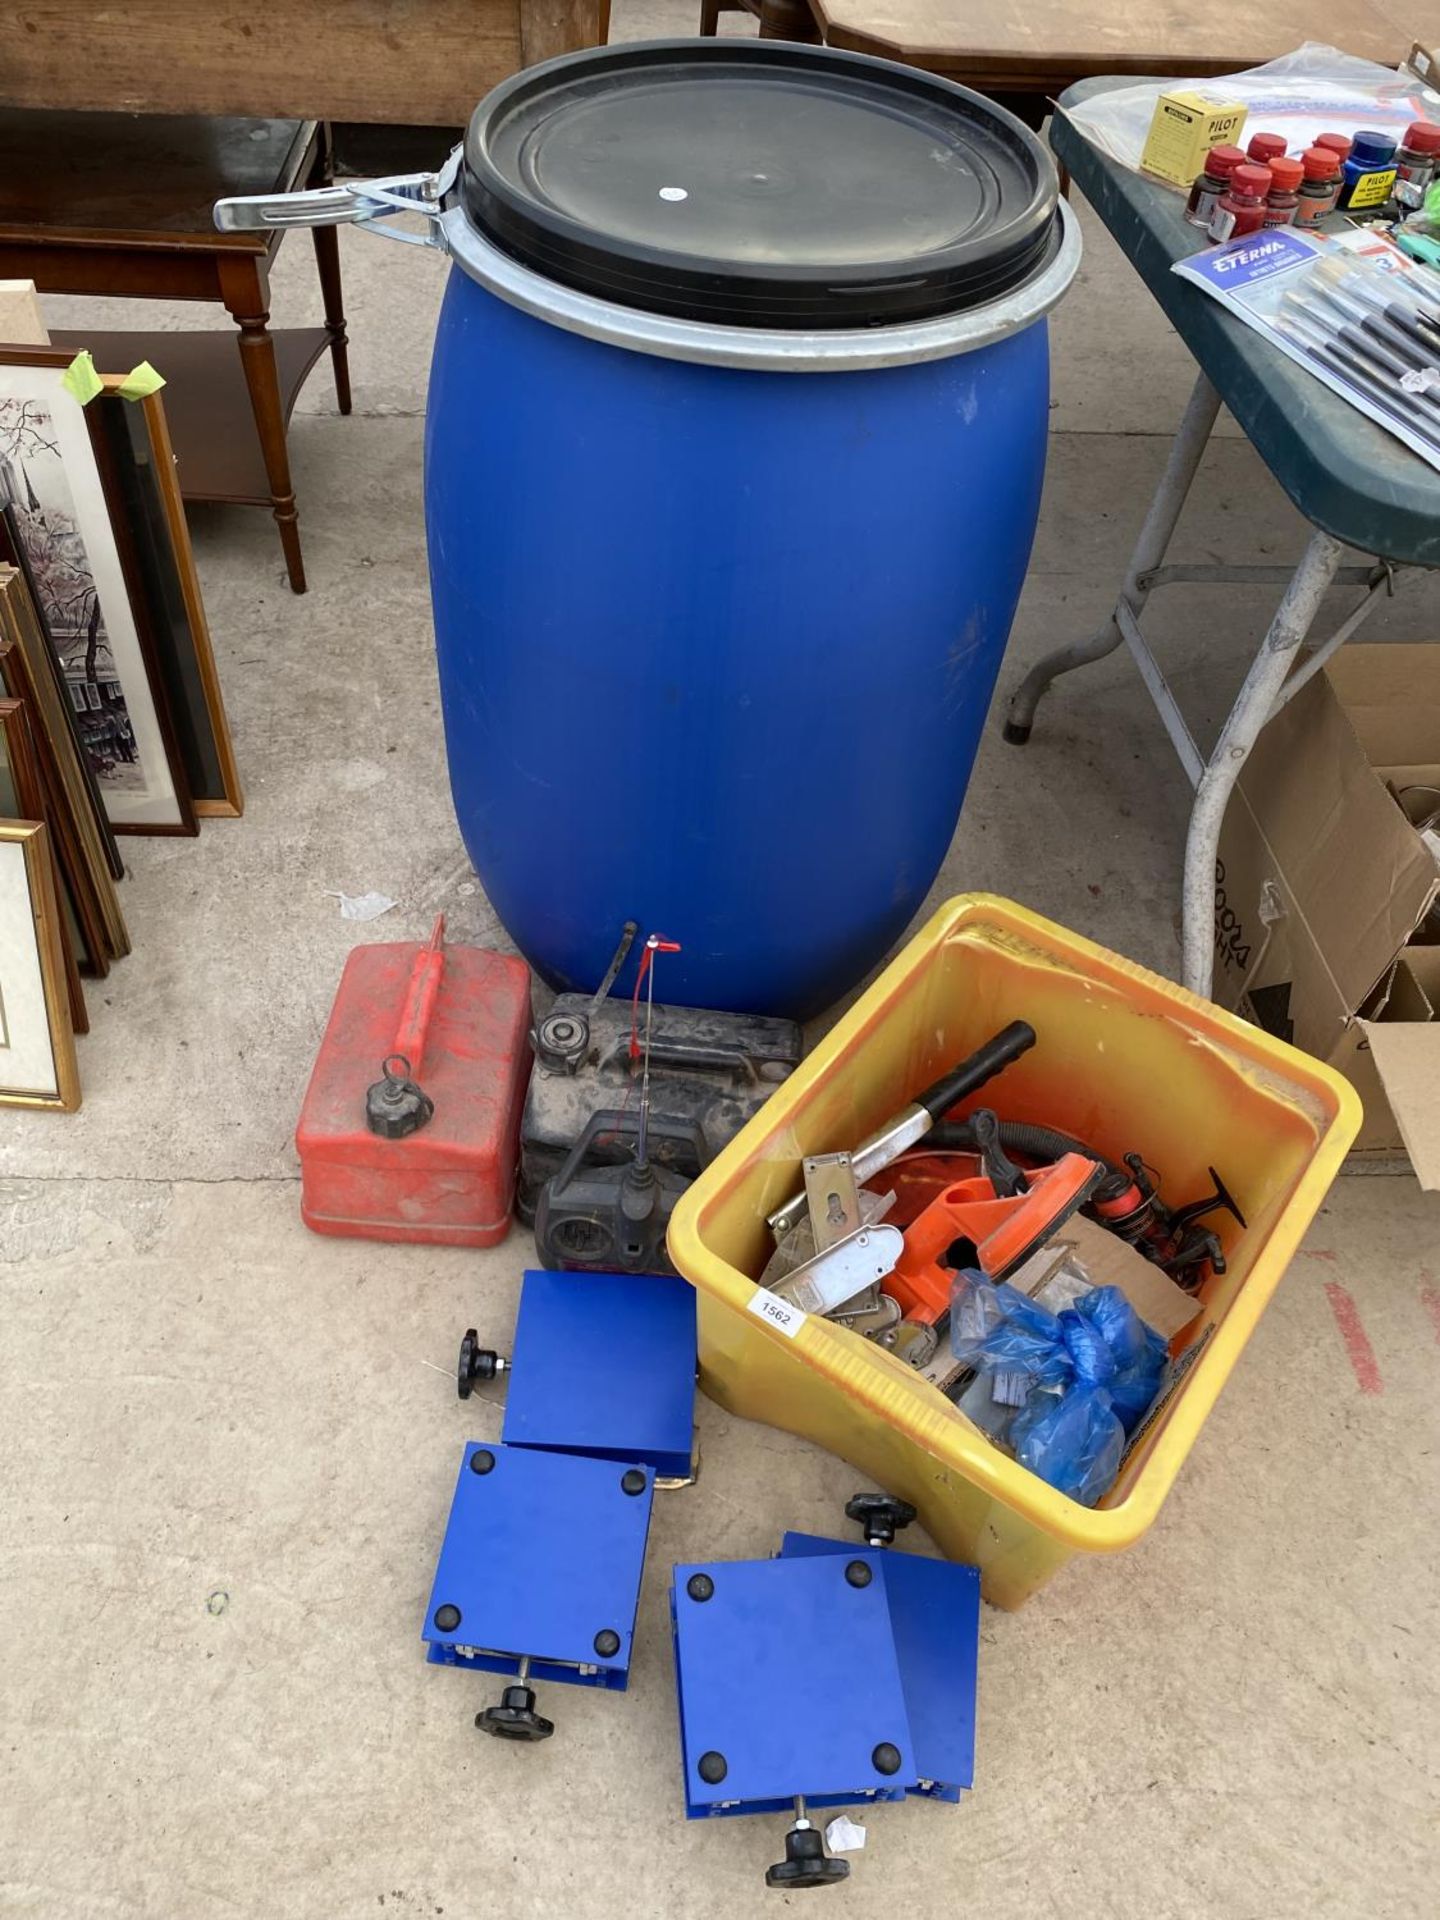 AN ASSORTMENT OF ITEMS TO INCLUDE A STORAGE BIN, GFUEL CANS AND A GREASE GUN ETC